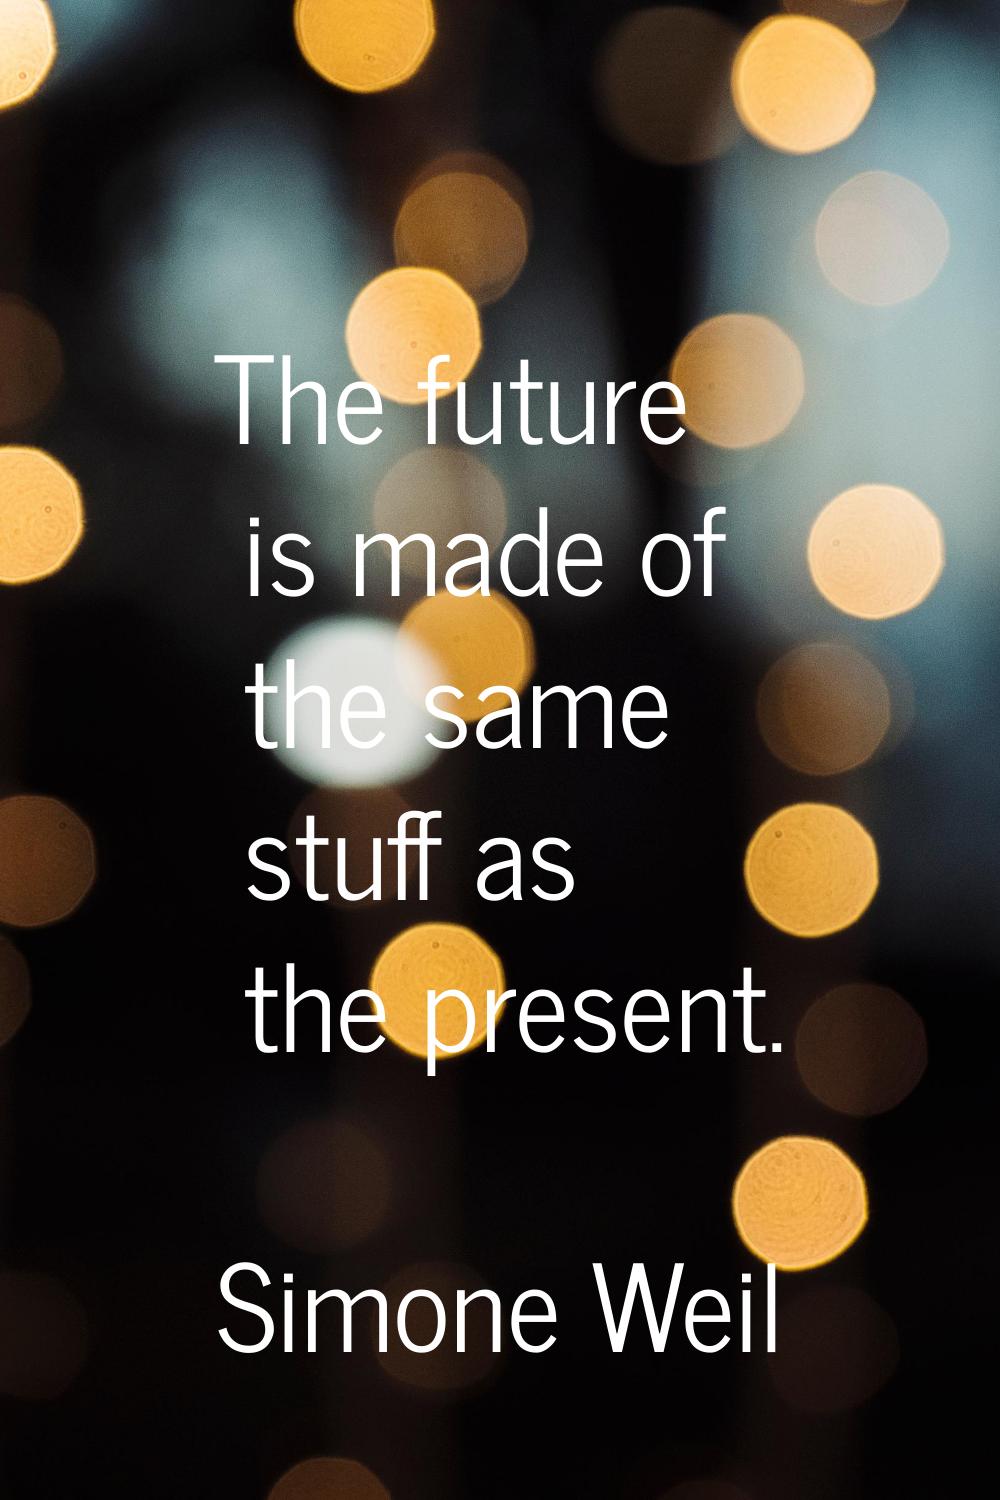 The future is made of the same stuff as the present.